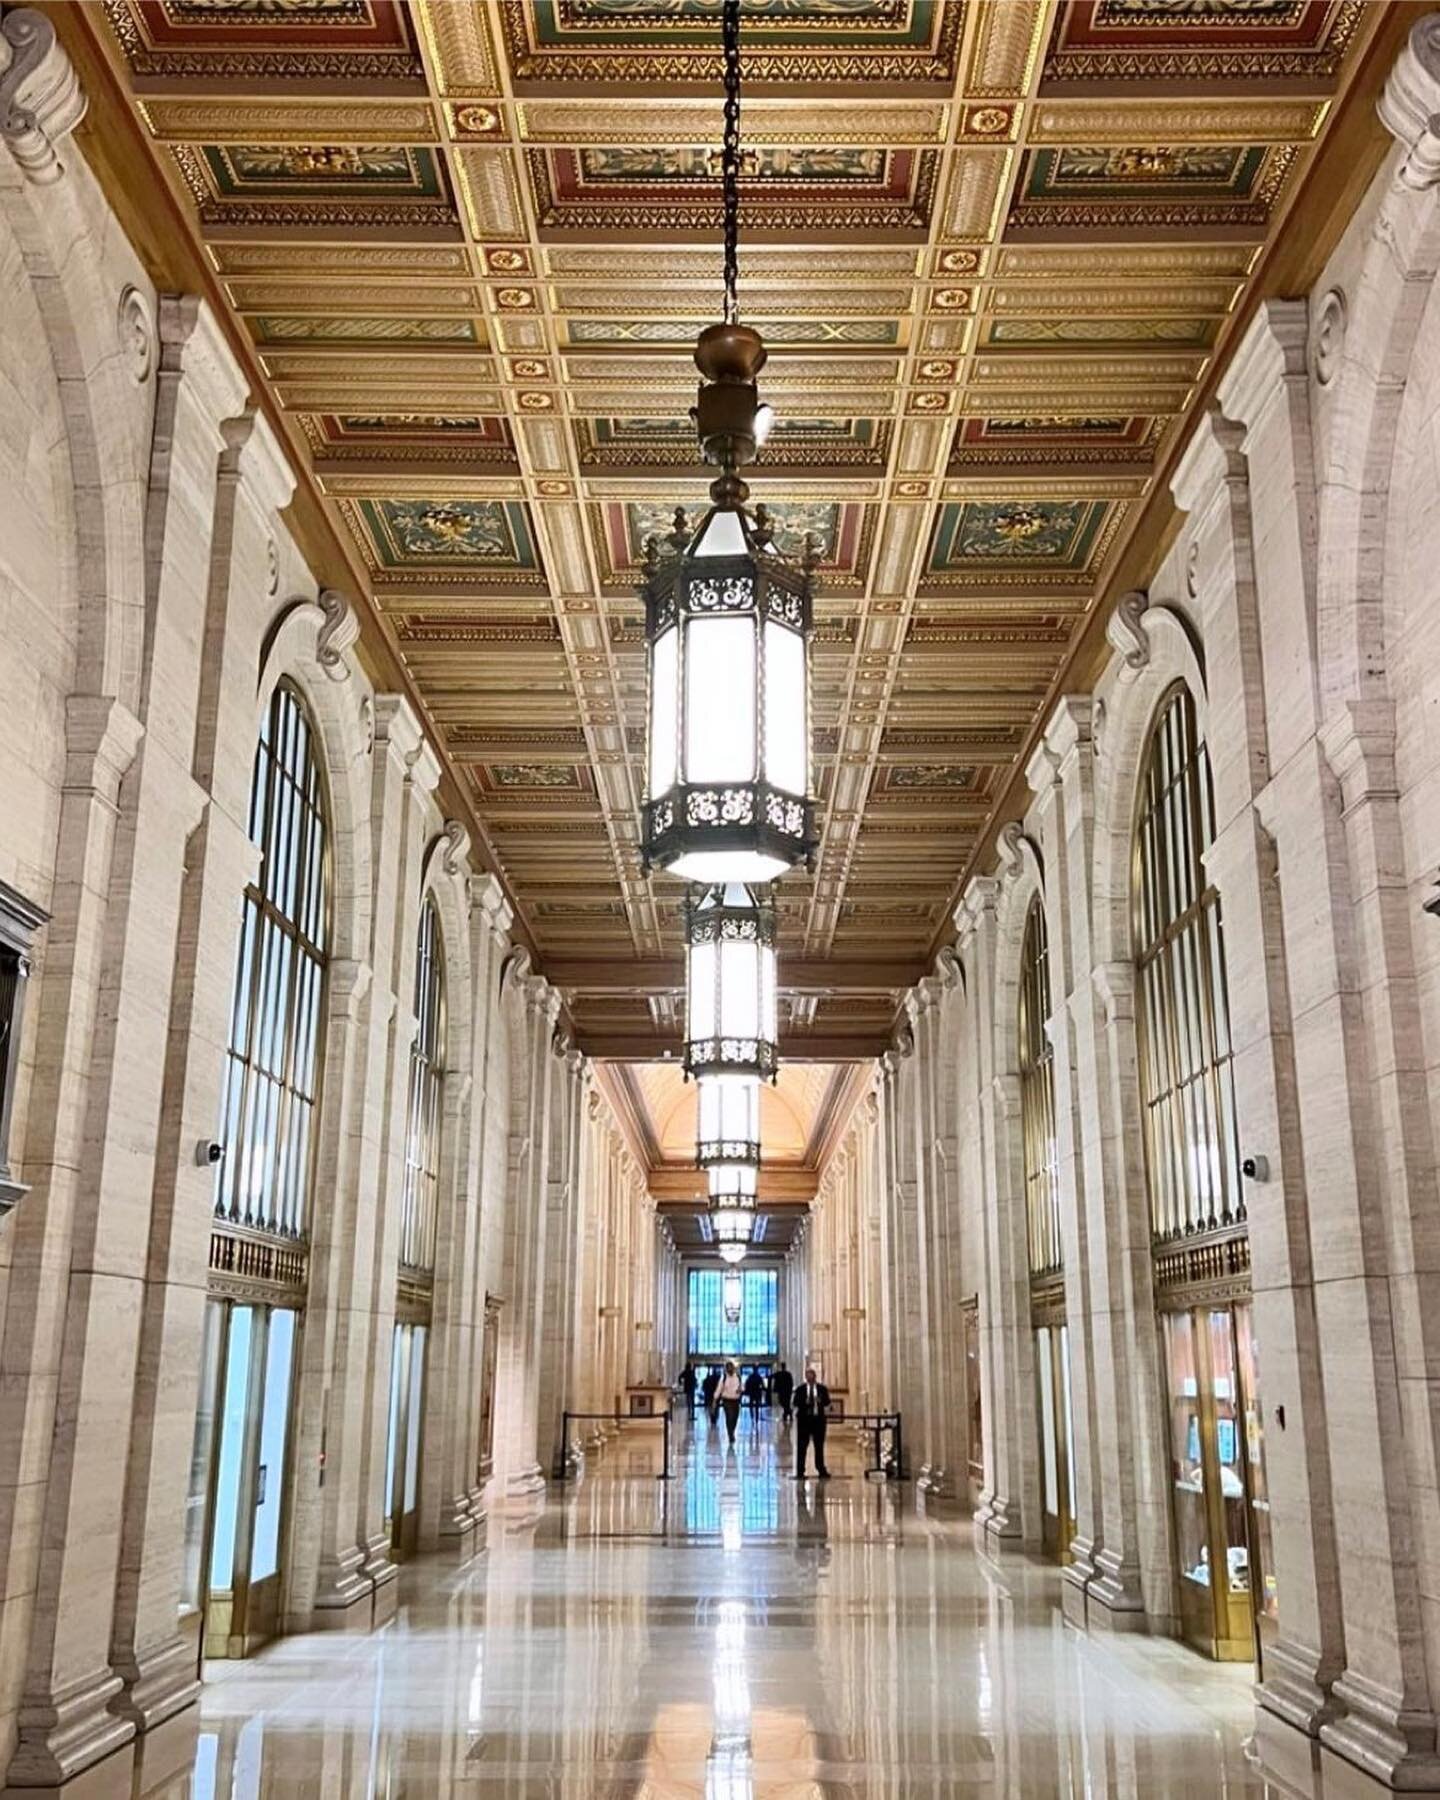 Repost of Repost from @averyfrankdesigns
&bull;
Stole this from the stories of @jeffreyquaritius. Too beautiful not to. The New York Life building lobby. 
.
.
.
.
#art #architecture #architecturedesign #architecturephotography #newyork #nyc #newyorkl